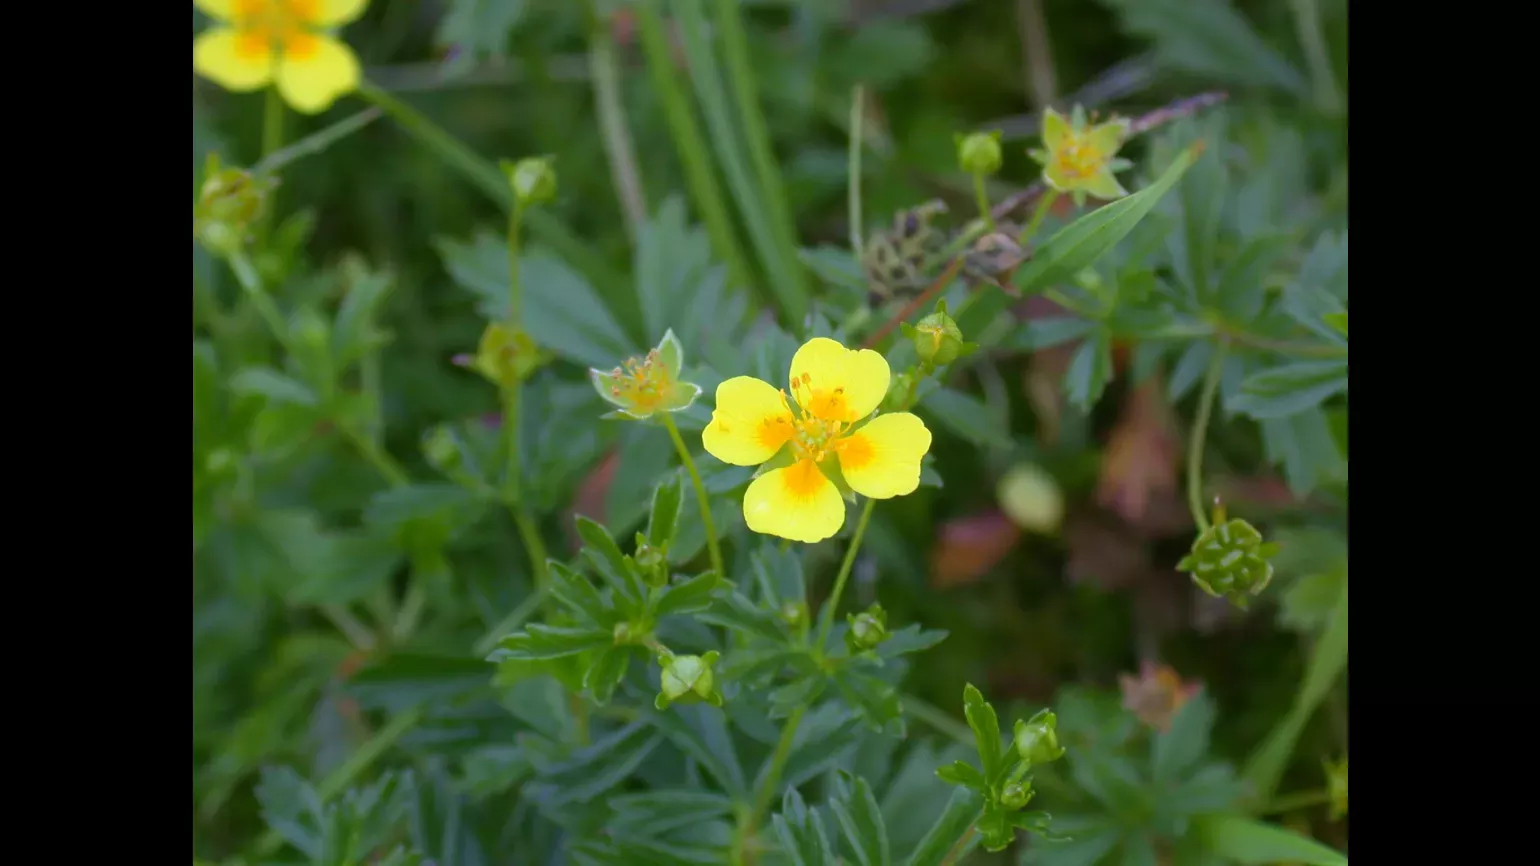 A small yellow flower with four equally spread petals sits atop a small plant